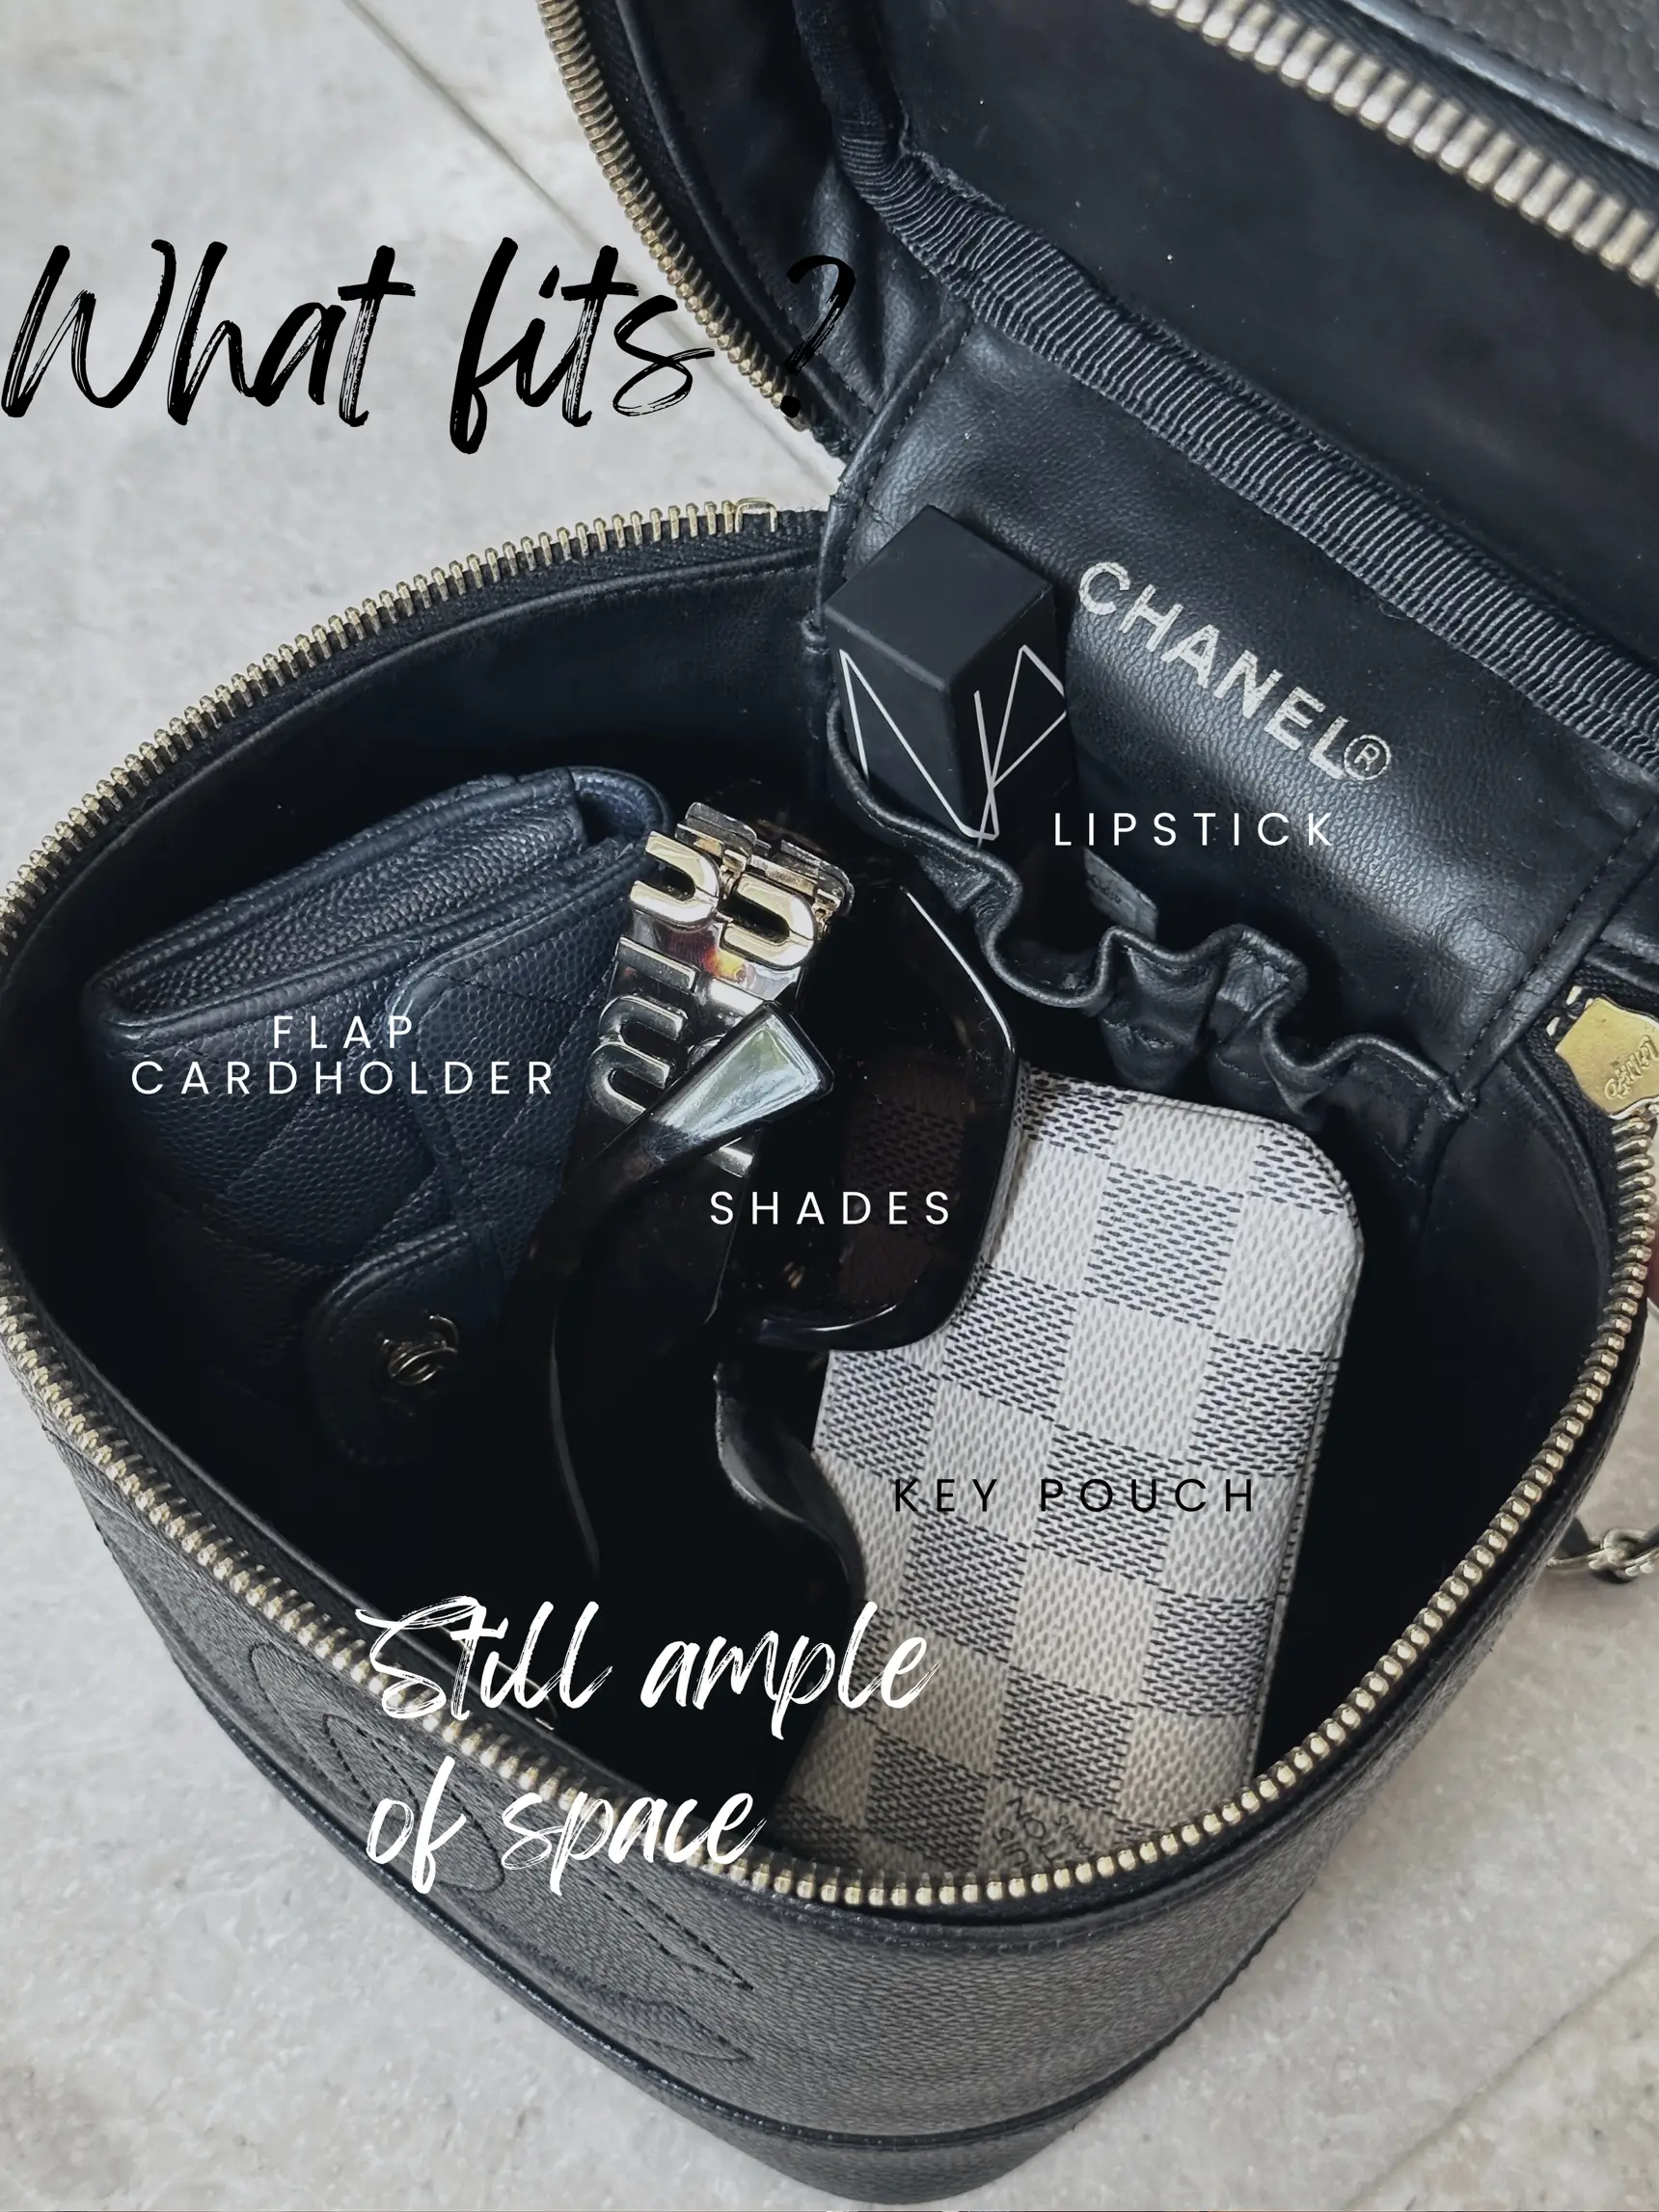 What fits in Chanel mini square? - Questions & Answers